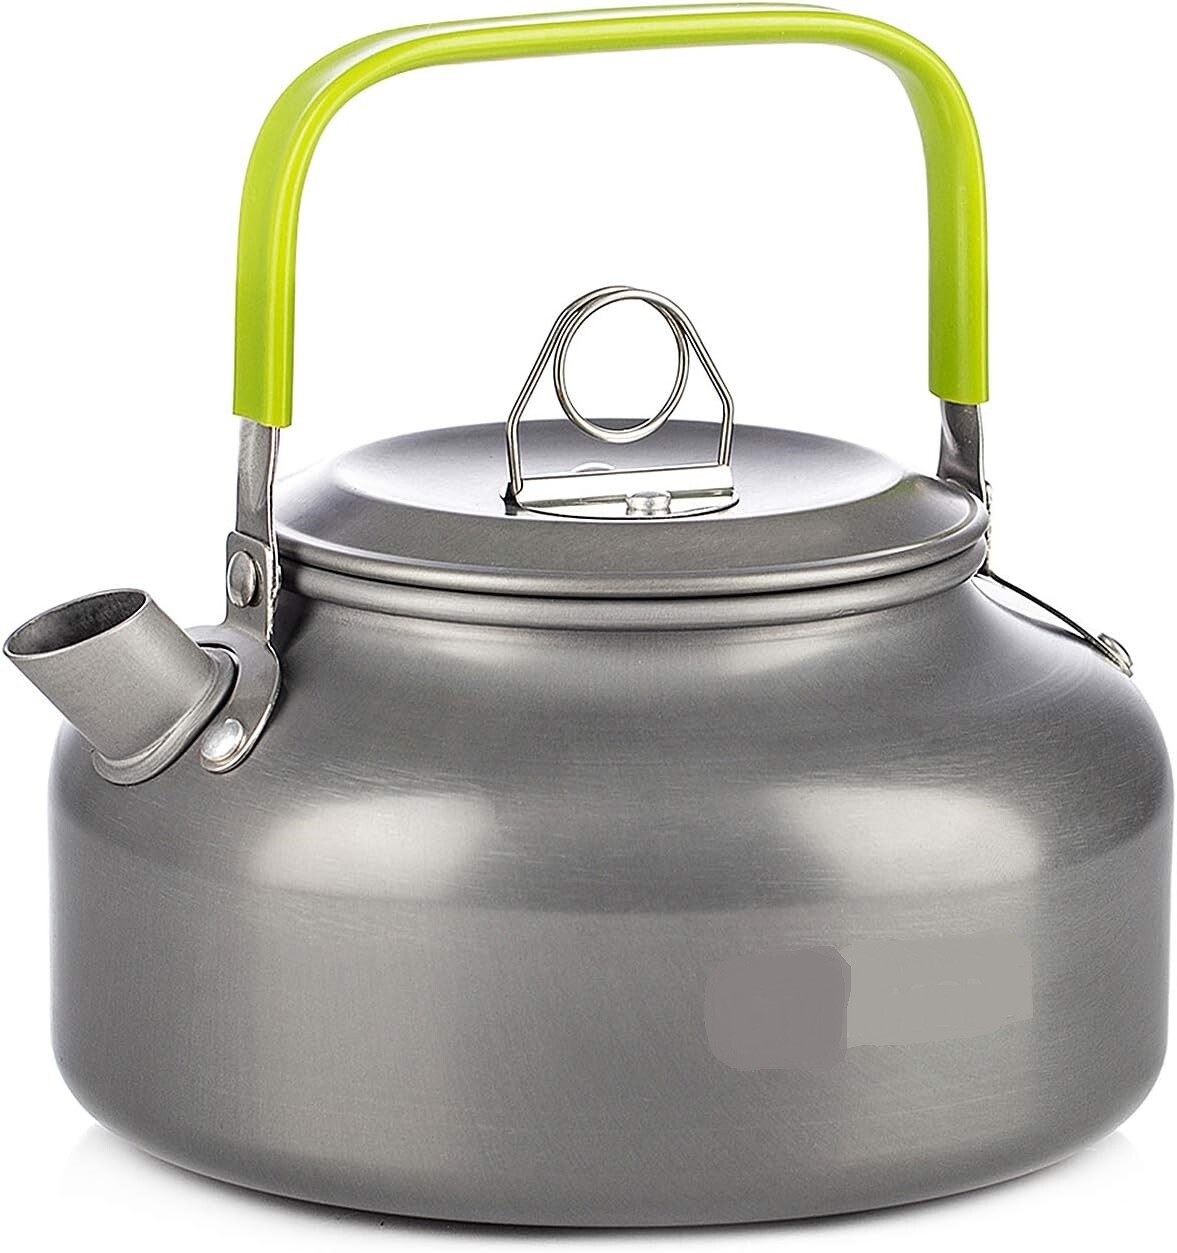 0.8-1.2L Camping Kettle For Tea & Coffee Cookware Set Outdoor Cooking Mess Kit Pots Pans Portable